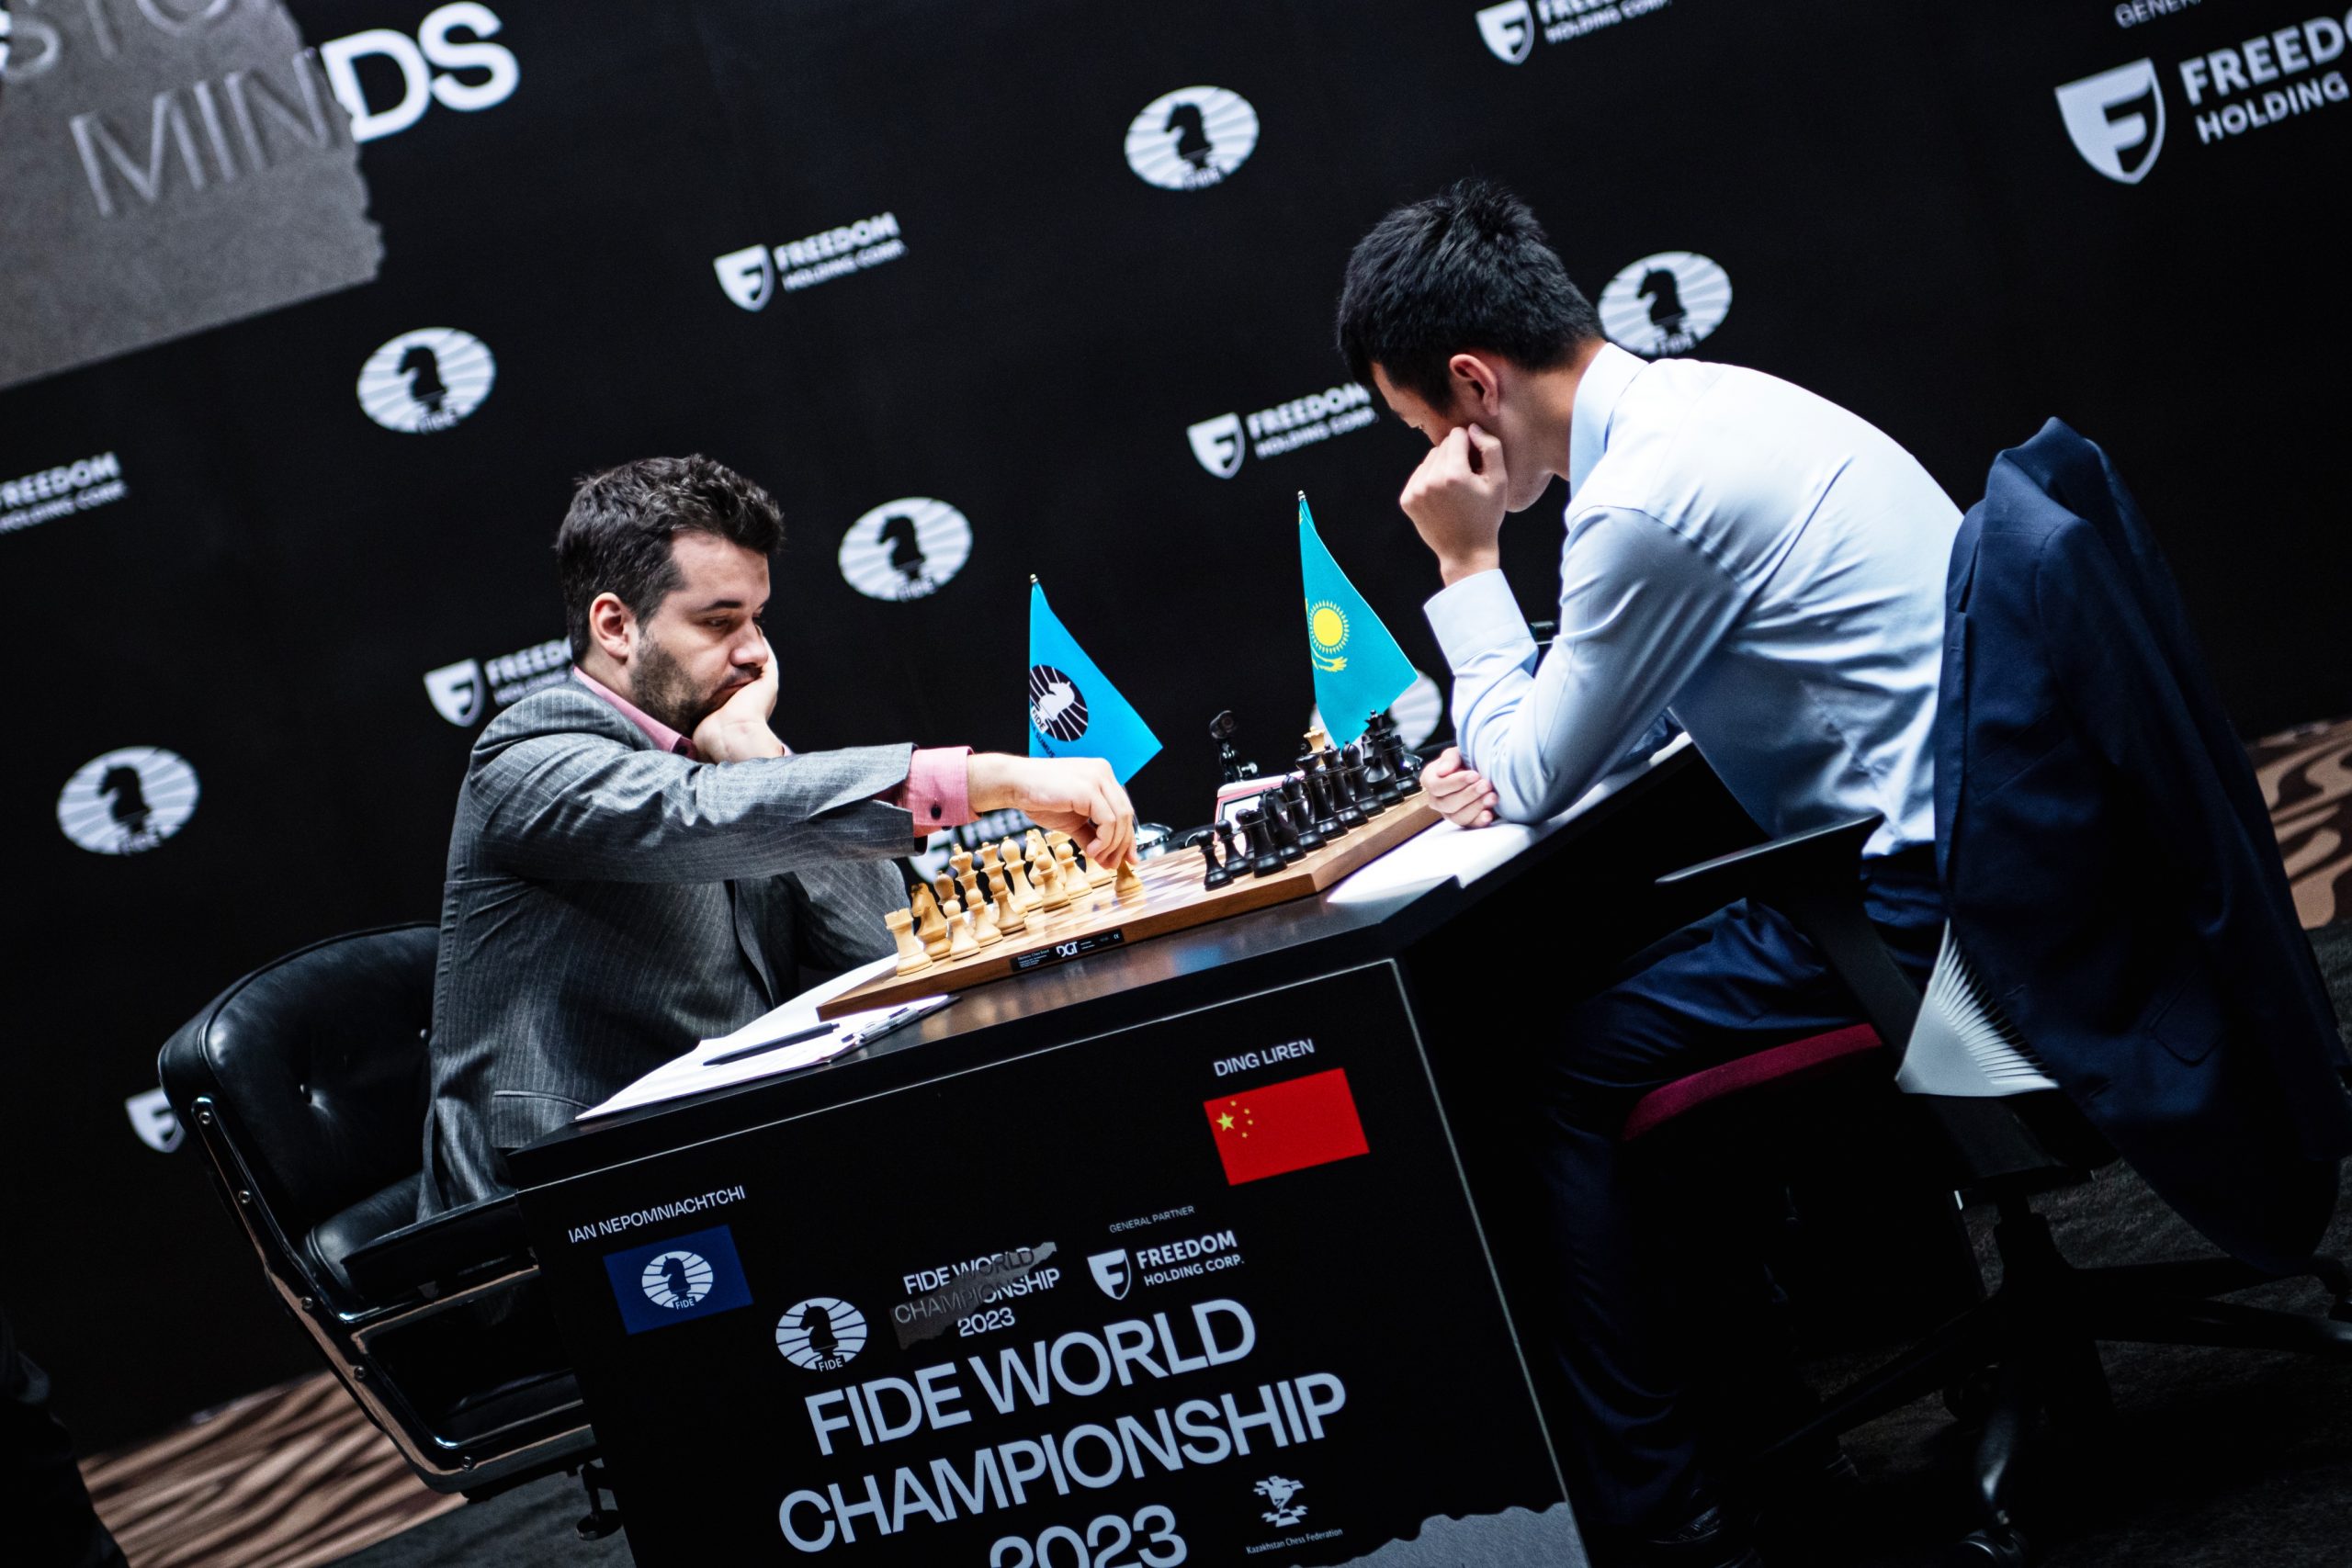 FIDE World Chess Championship Game 11 ends in short 39move draw